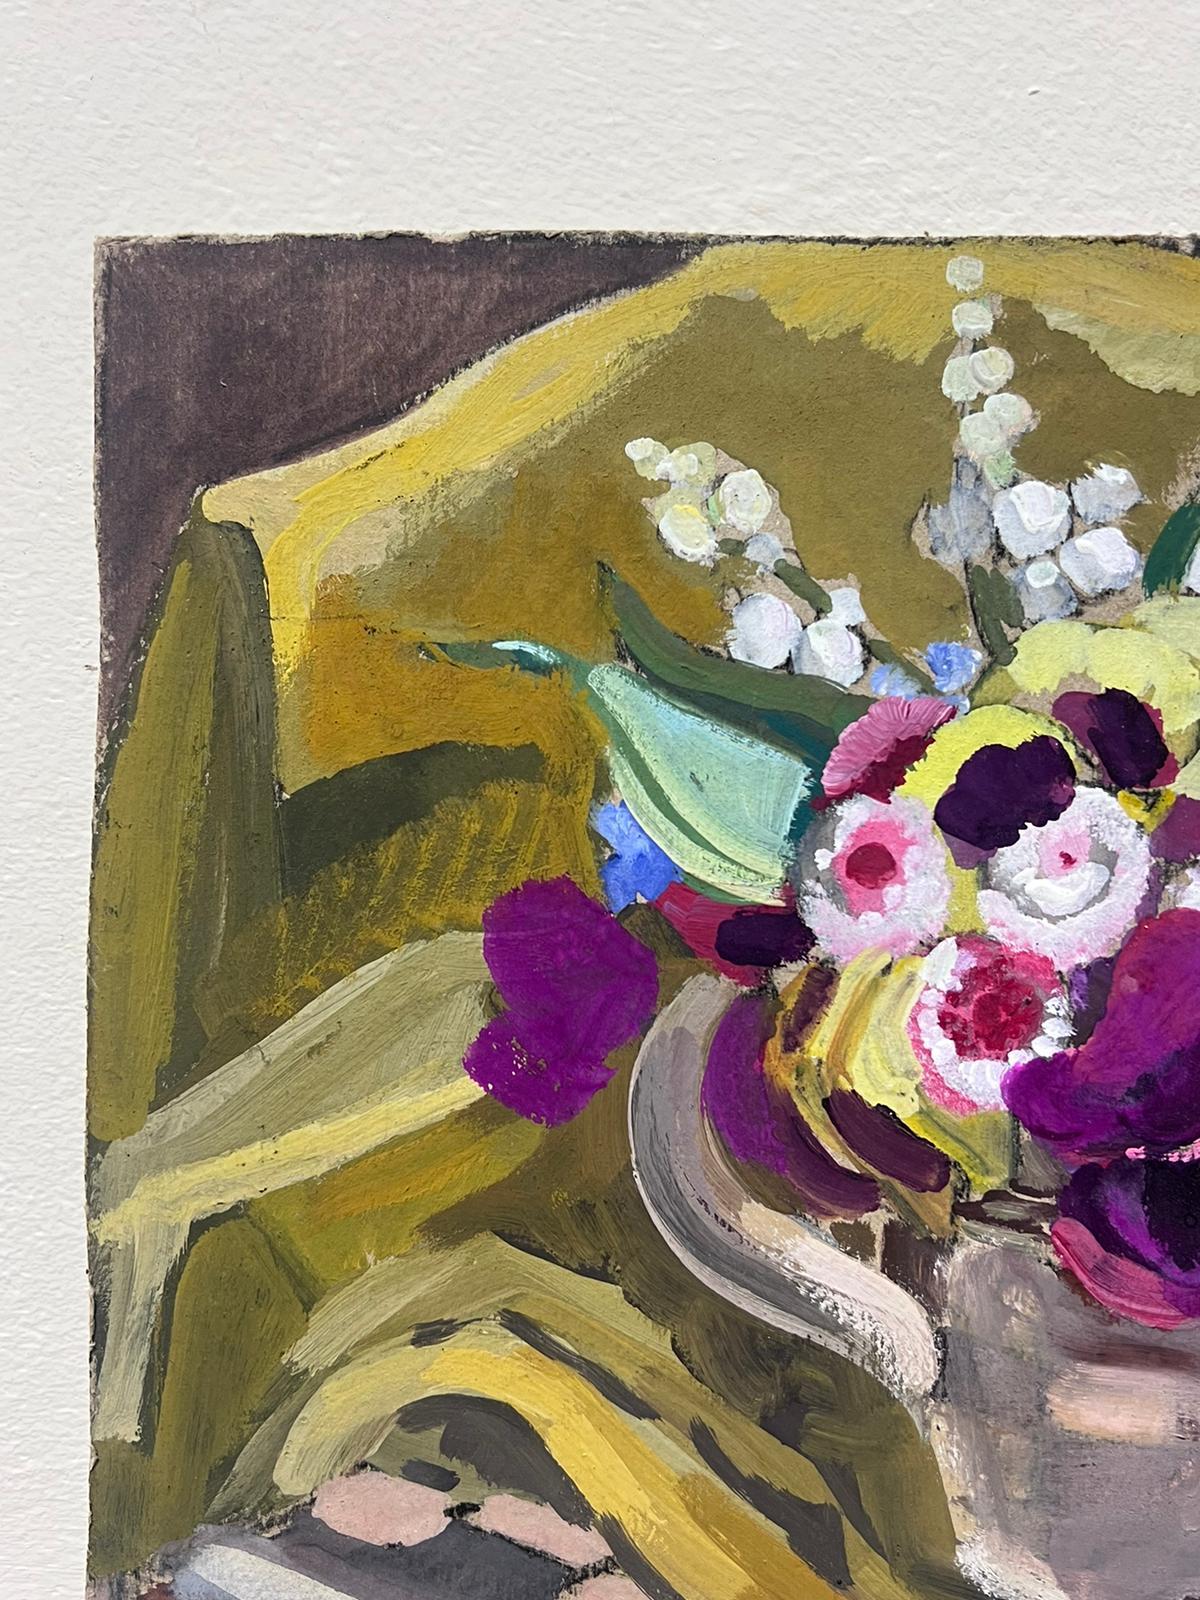 Purple Flower Bunch
by Louise Alix (French, 1888-1980) *see notes below
provenance stamp to the back 
oil painting on board, unframed
measures: 10.75 high by 13 inches wide
condition: overall very good and sound, a few scuffs and marks to the